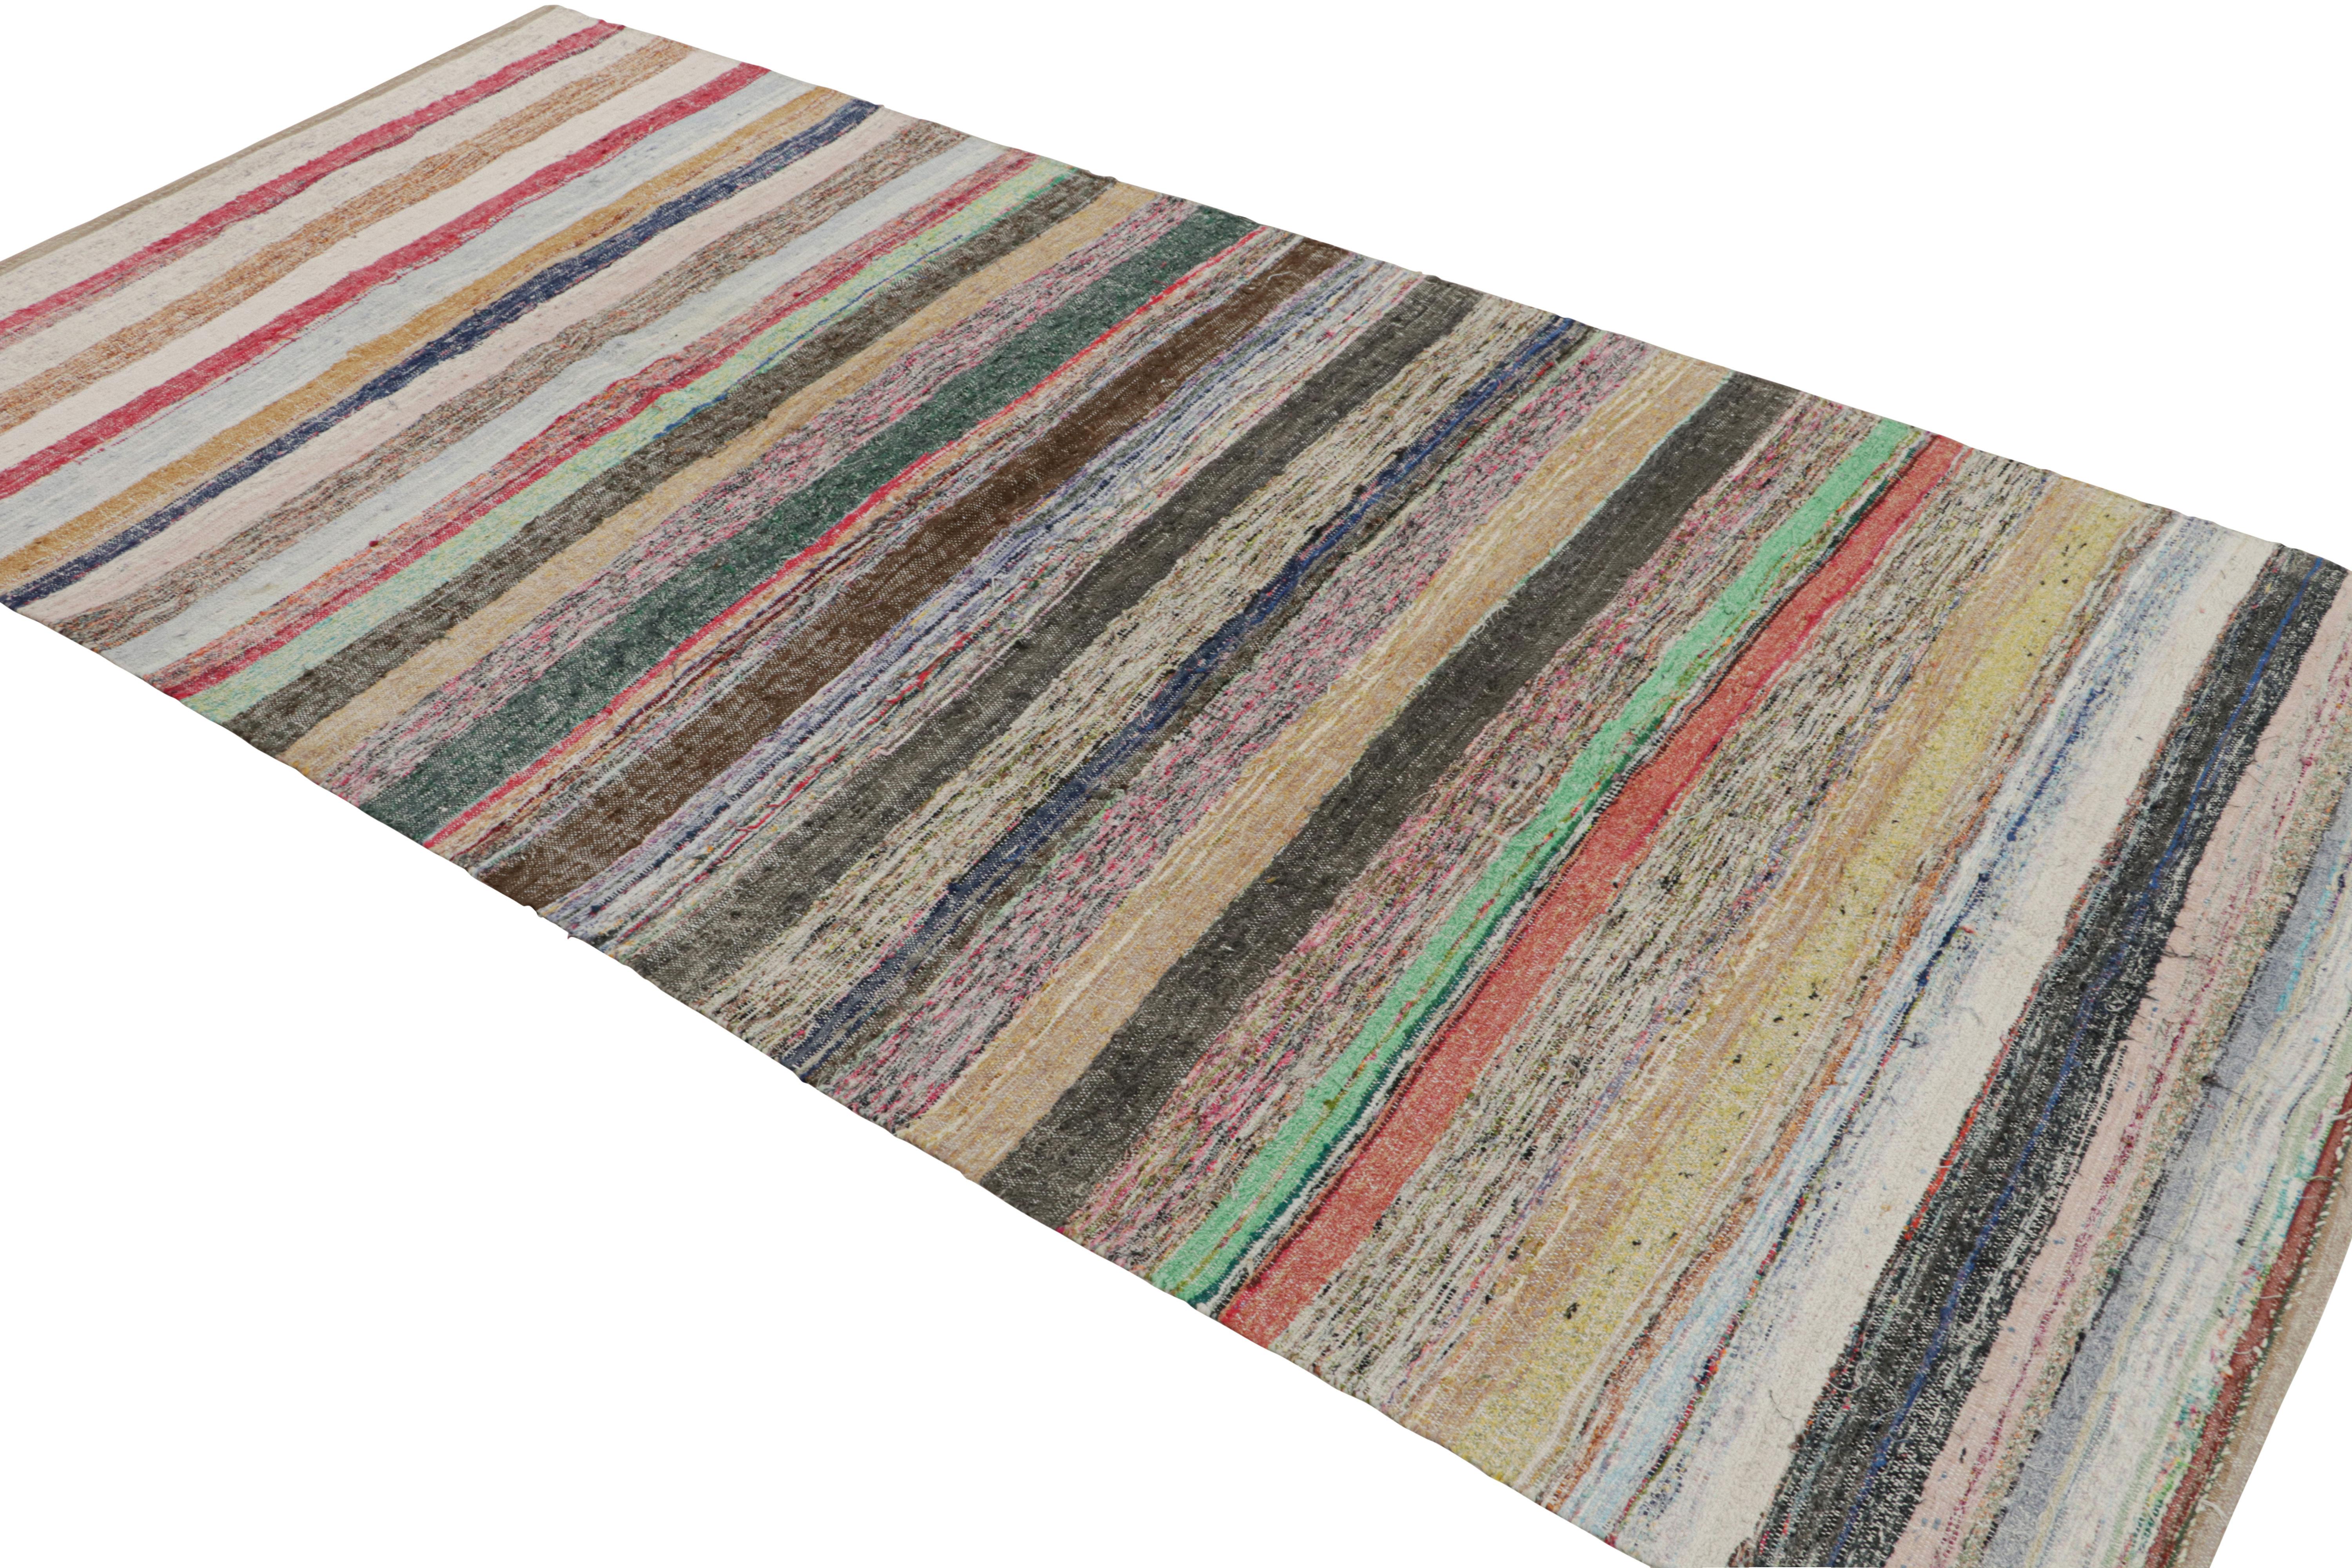 Hand-Knotted Vintage Striped Beige Brown and Multi-Color Wool Kilim Rug by Rug & Kilim For Sale